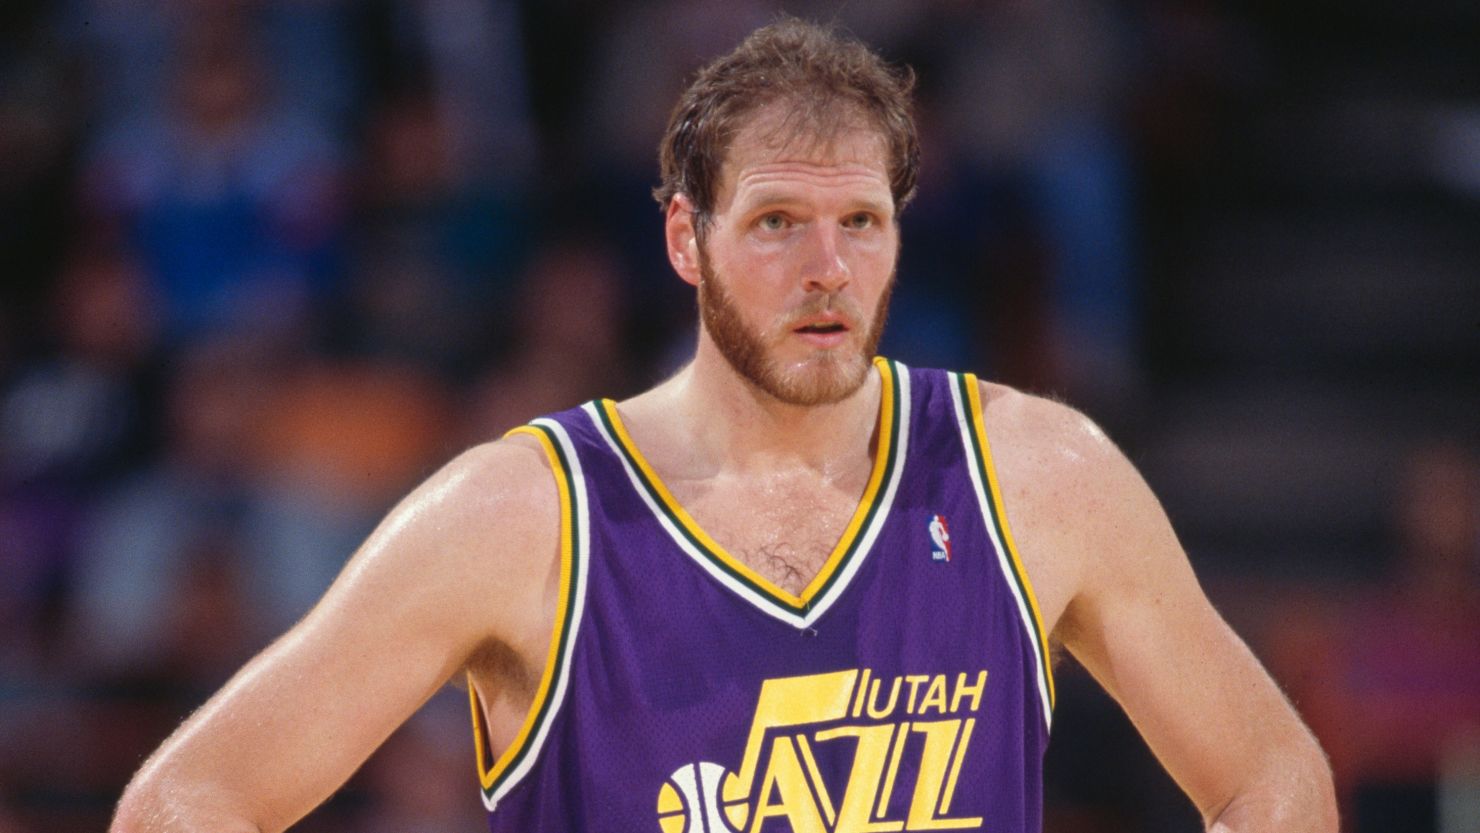 Utah Jazz center Mark Eaton during a game against the Los Angeles Lakers at the Forum arena in Los Angeles on January 9, 1991.